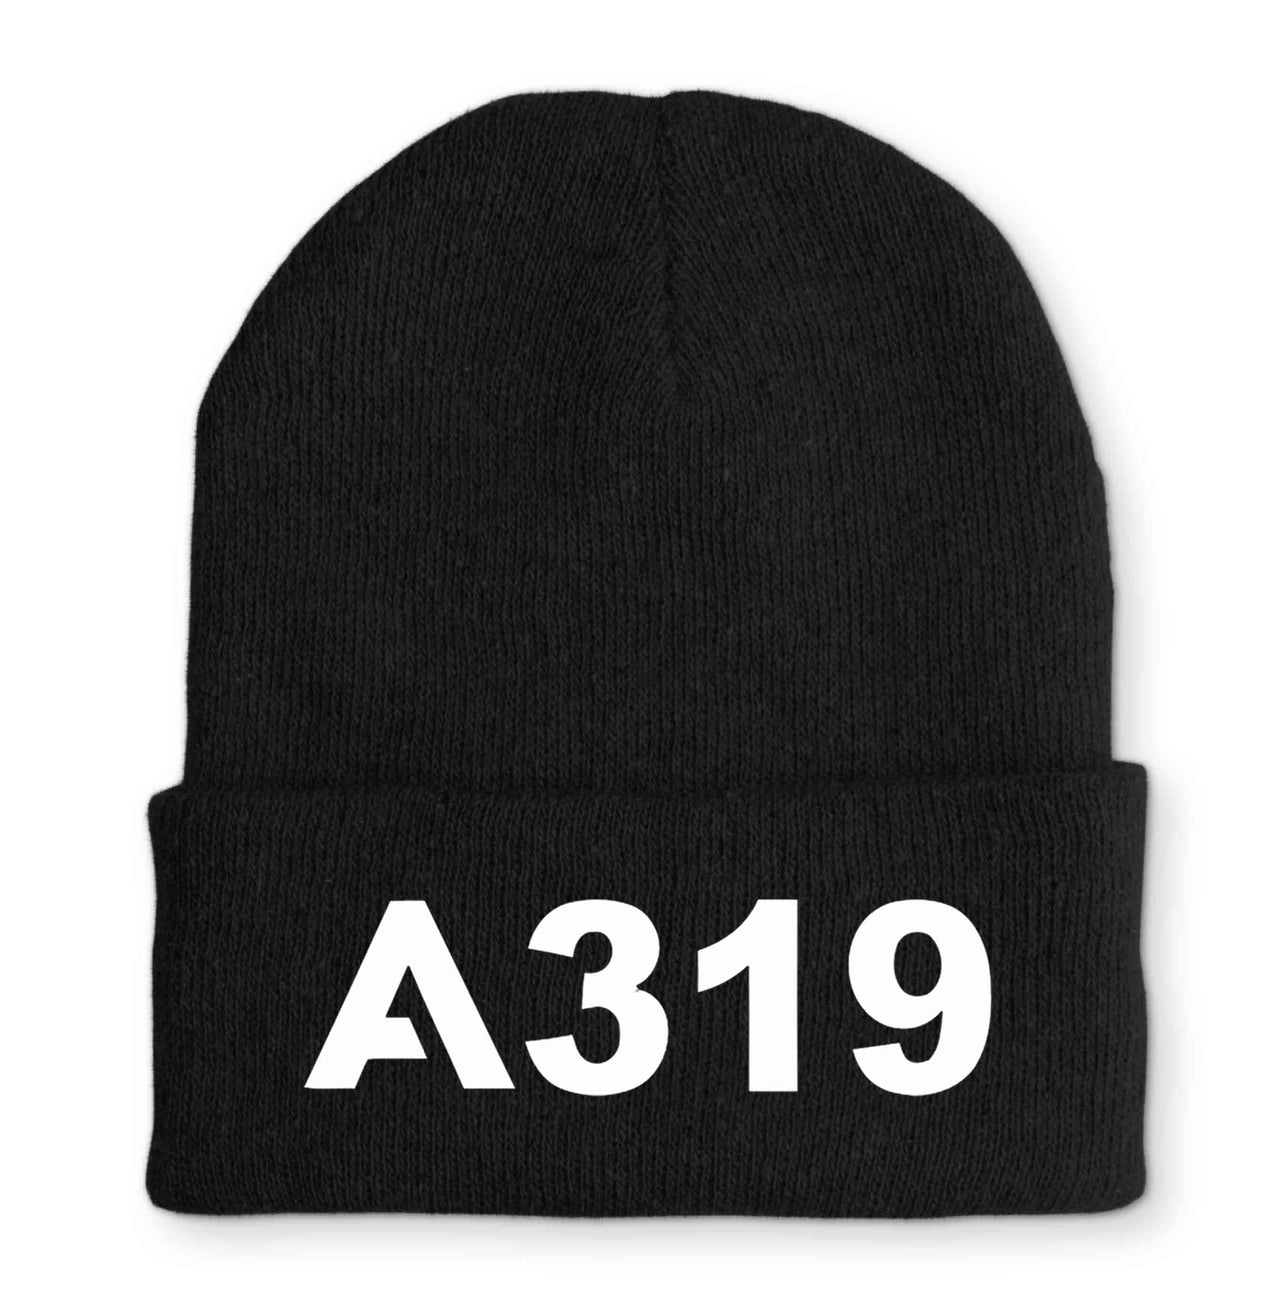 A319 Flat Text Embroidered Beanies